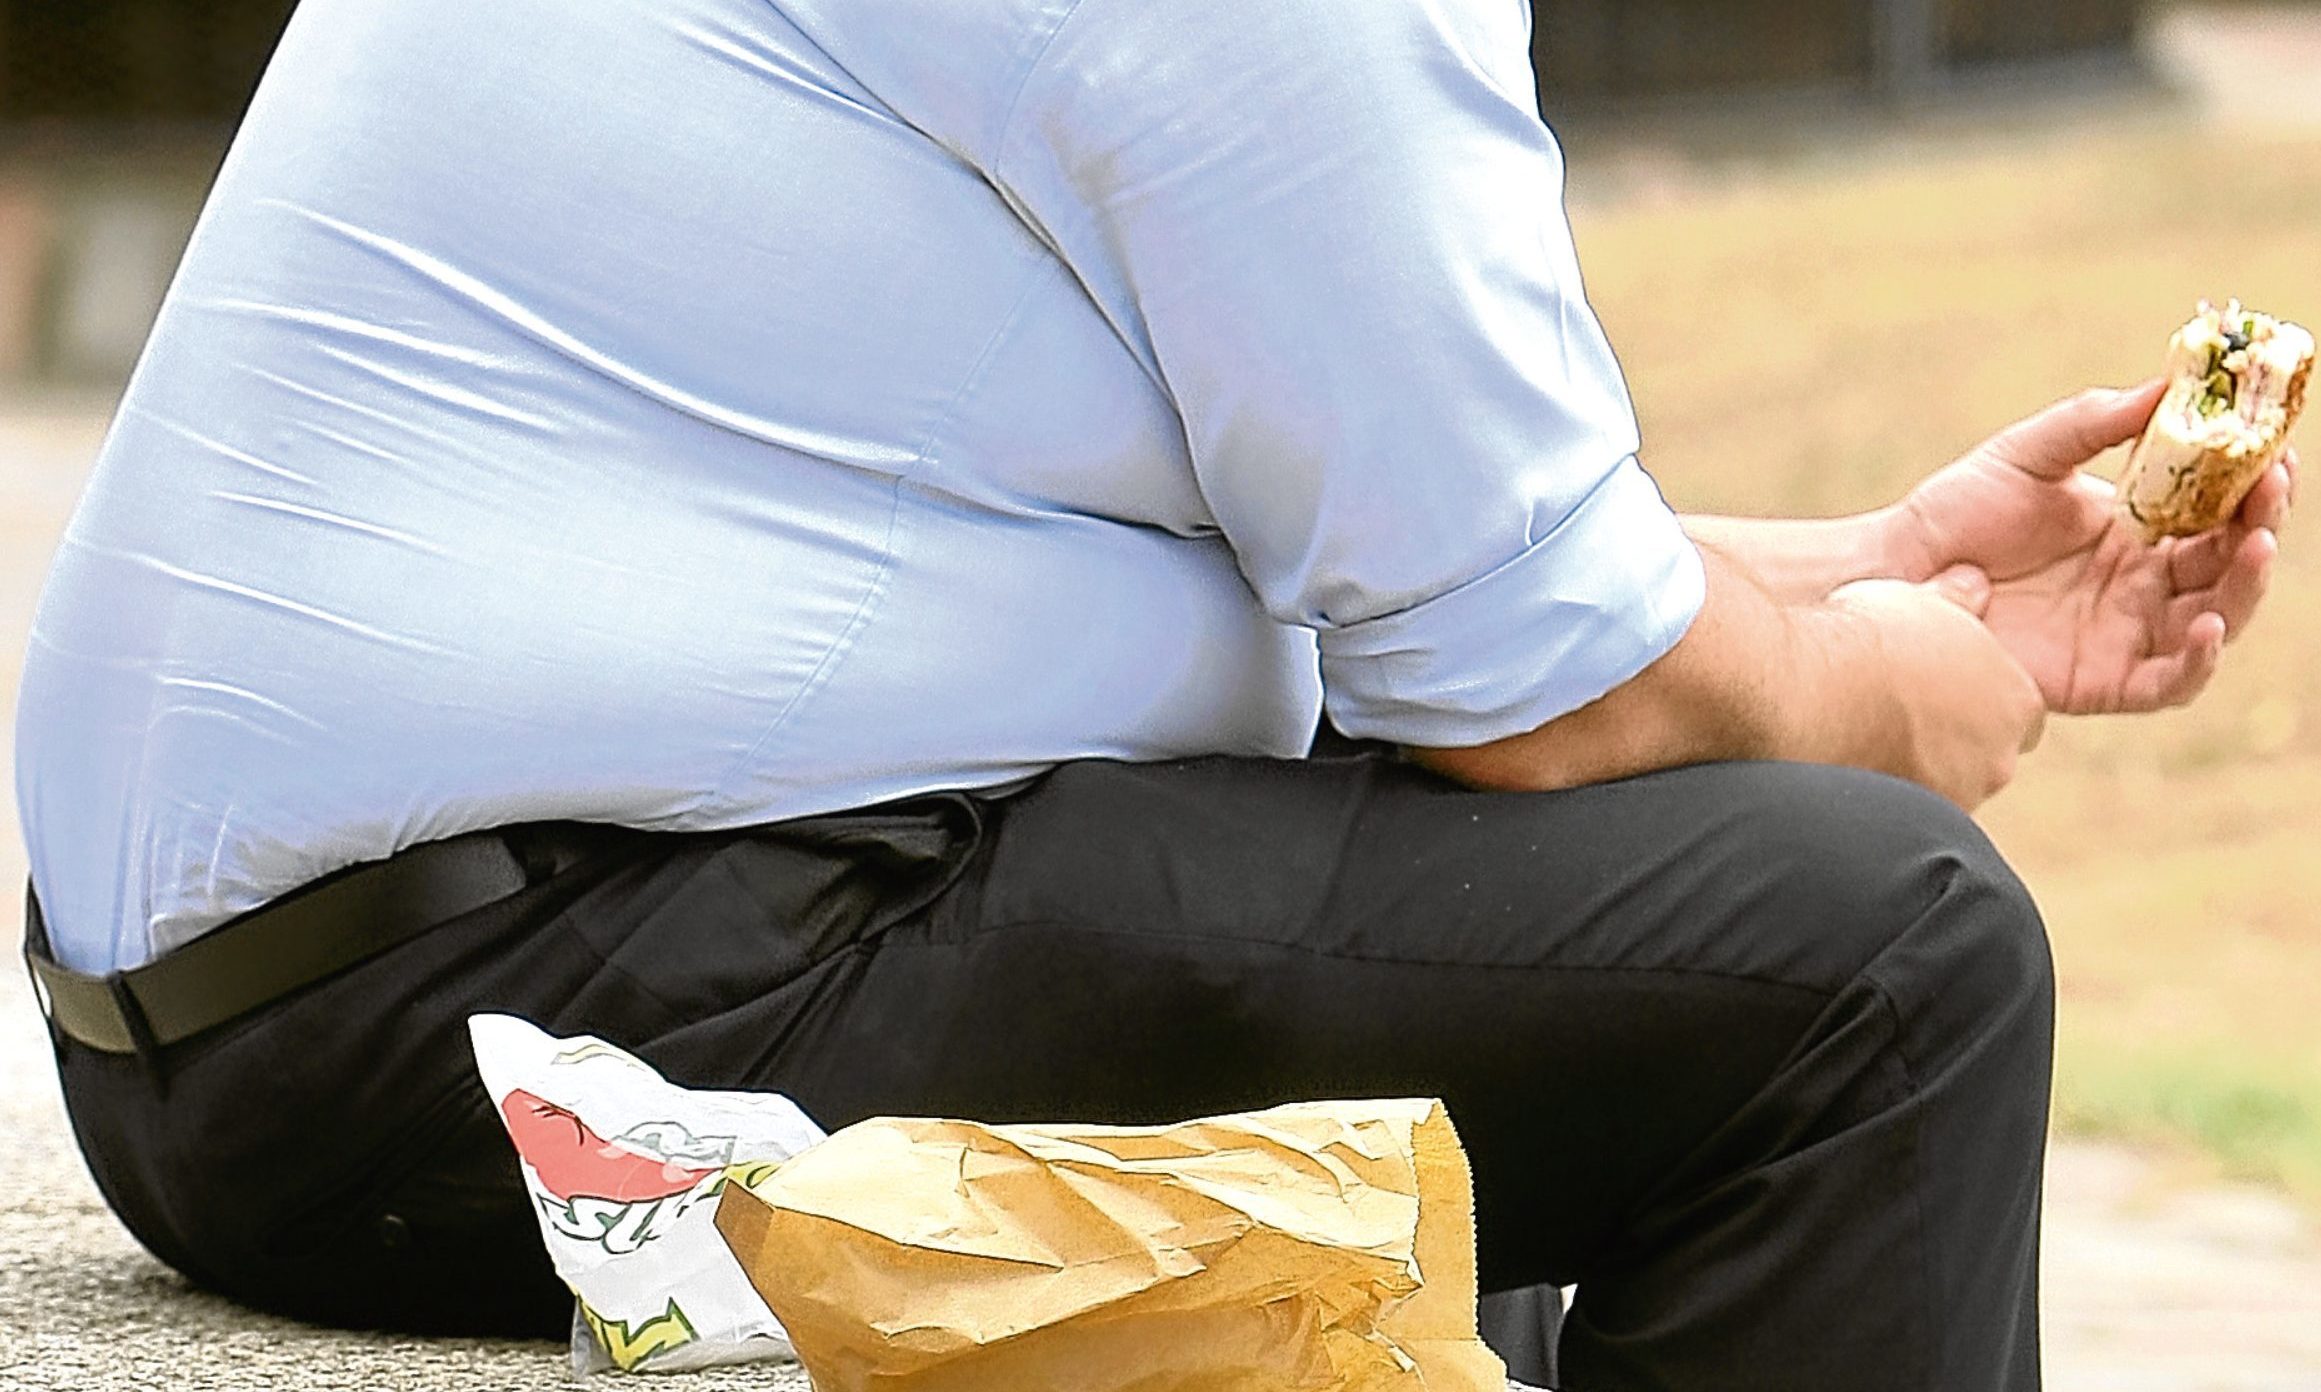 Dundee professors believe free pedometers would make inroads into the obesity crisis.